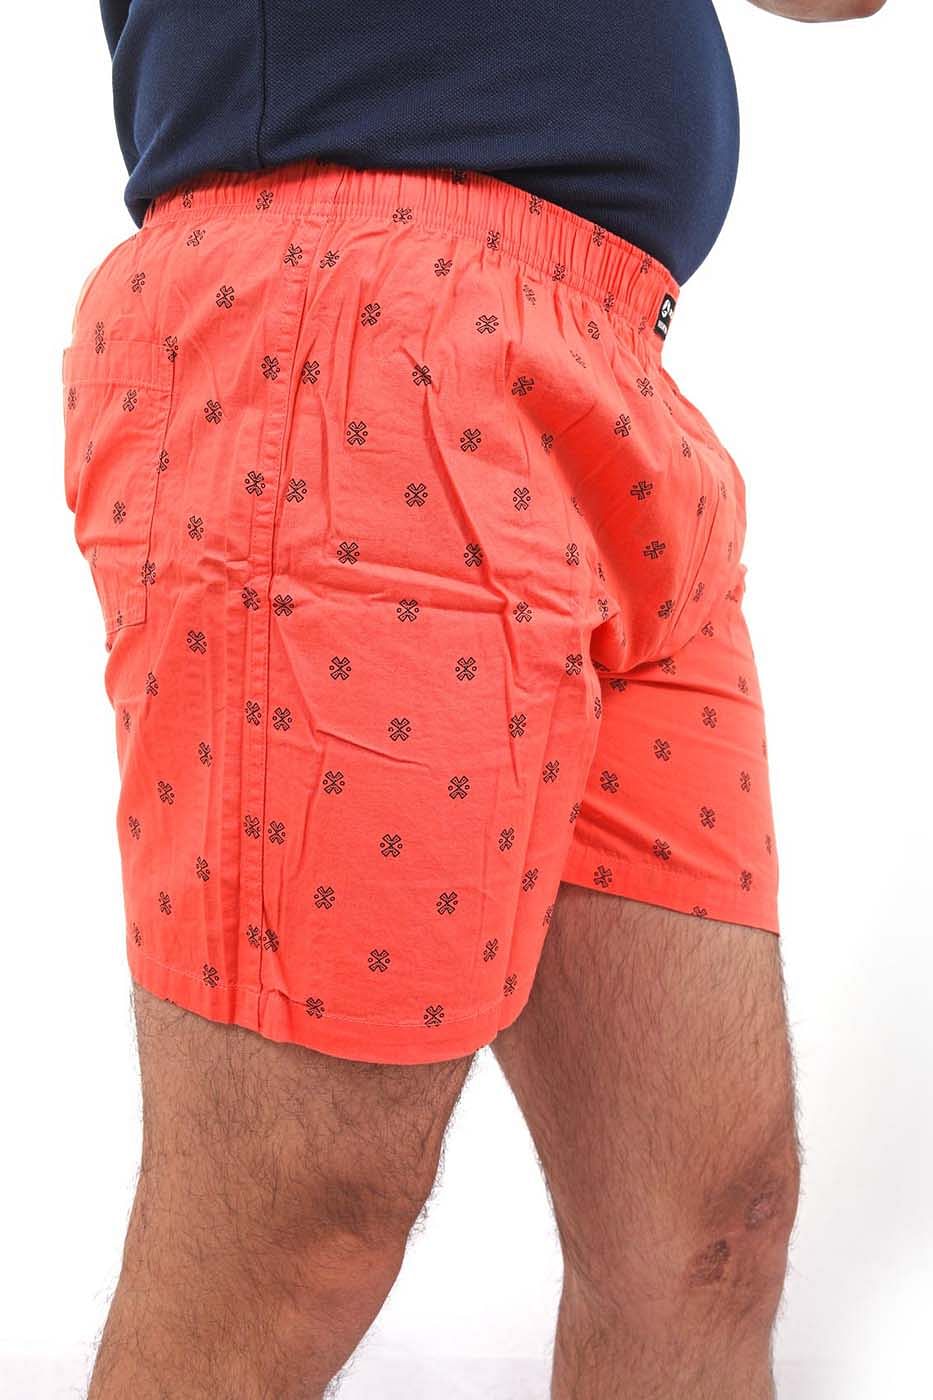 BOXER SHORTS CS-BS3010, Red